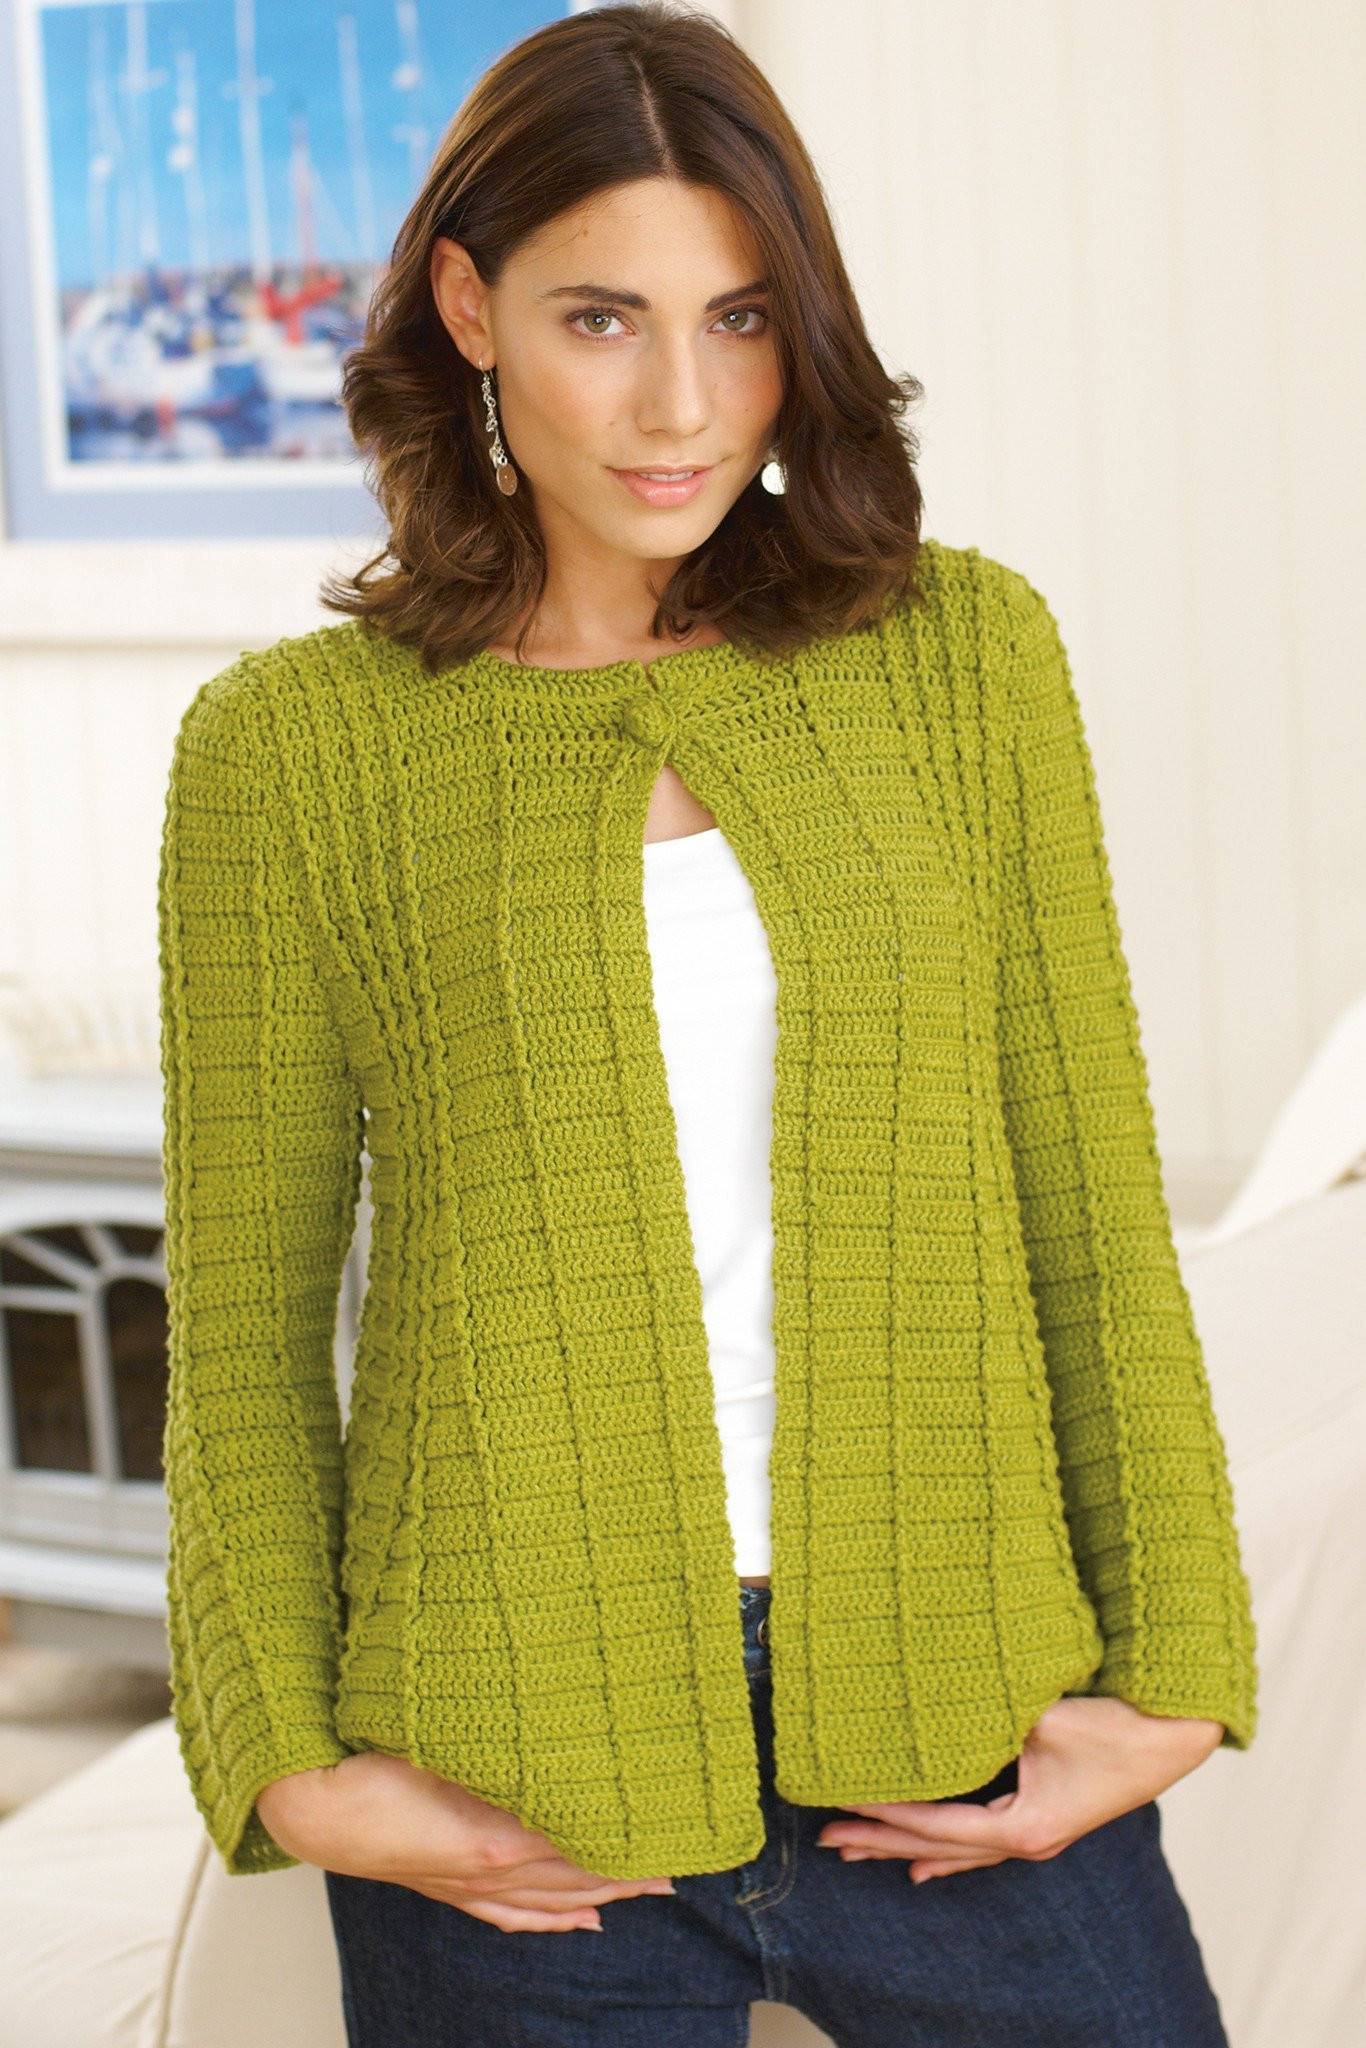 Fit And Flare Womens Jacket Crochet Pattern